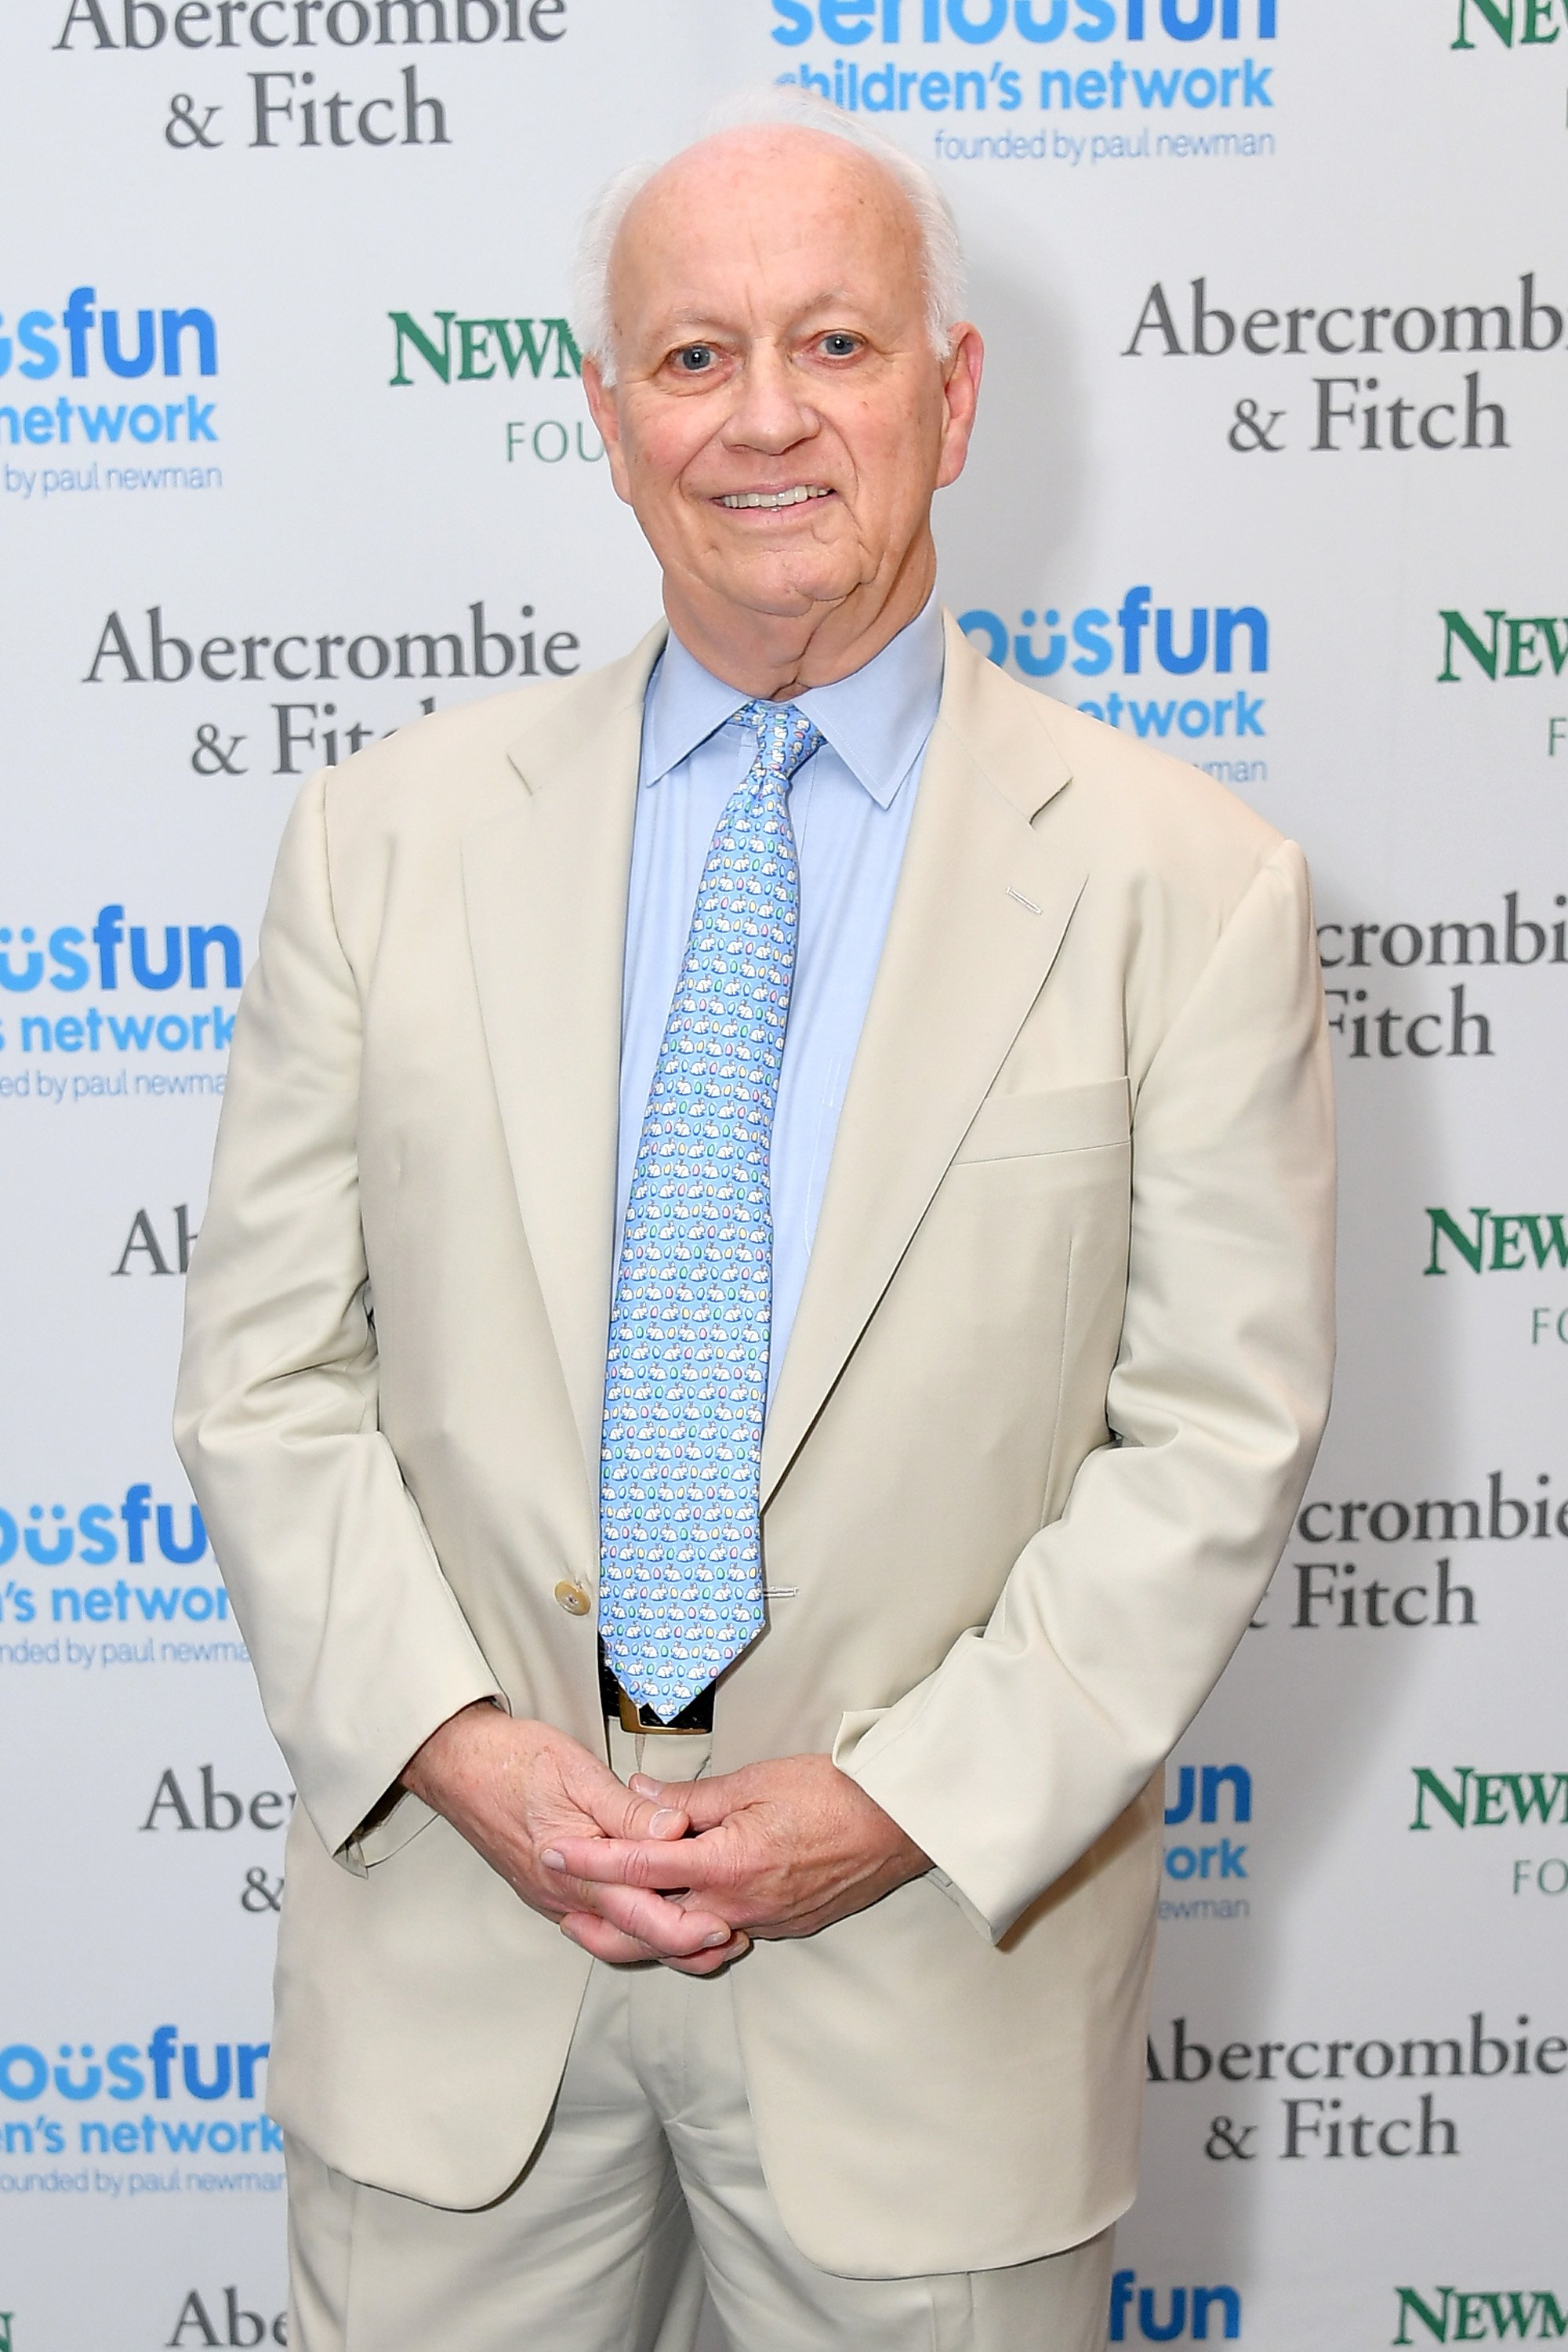 Bob Forrester during the 2018 SeriousFun Children's Network Gala at The Ziegfeld Ballroom on May 21, 2018 in New York City. / Source: Getty Images